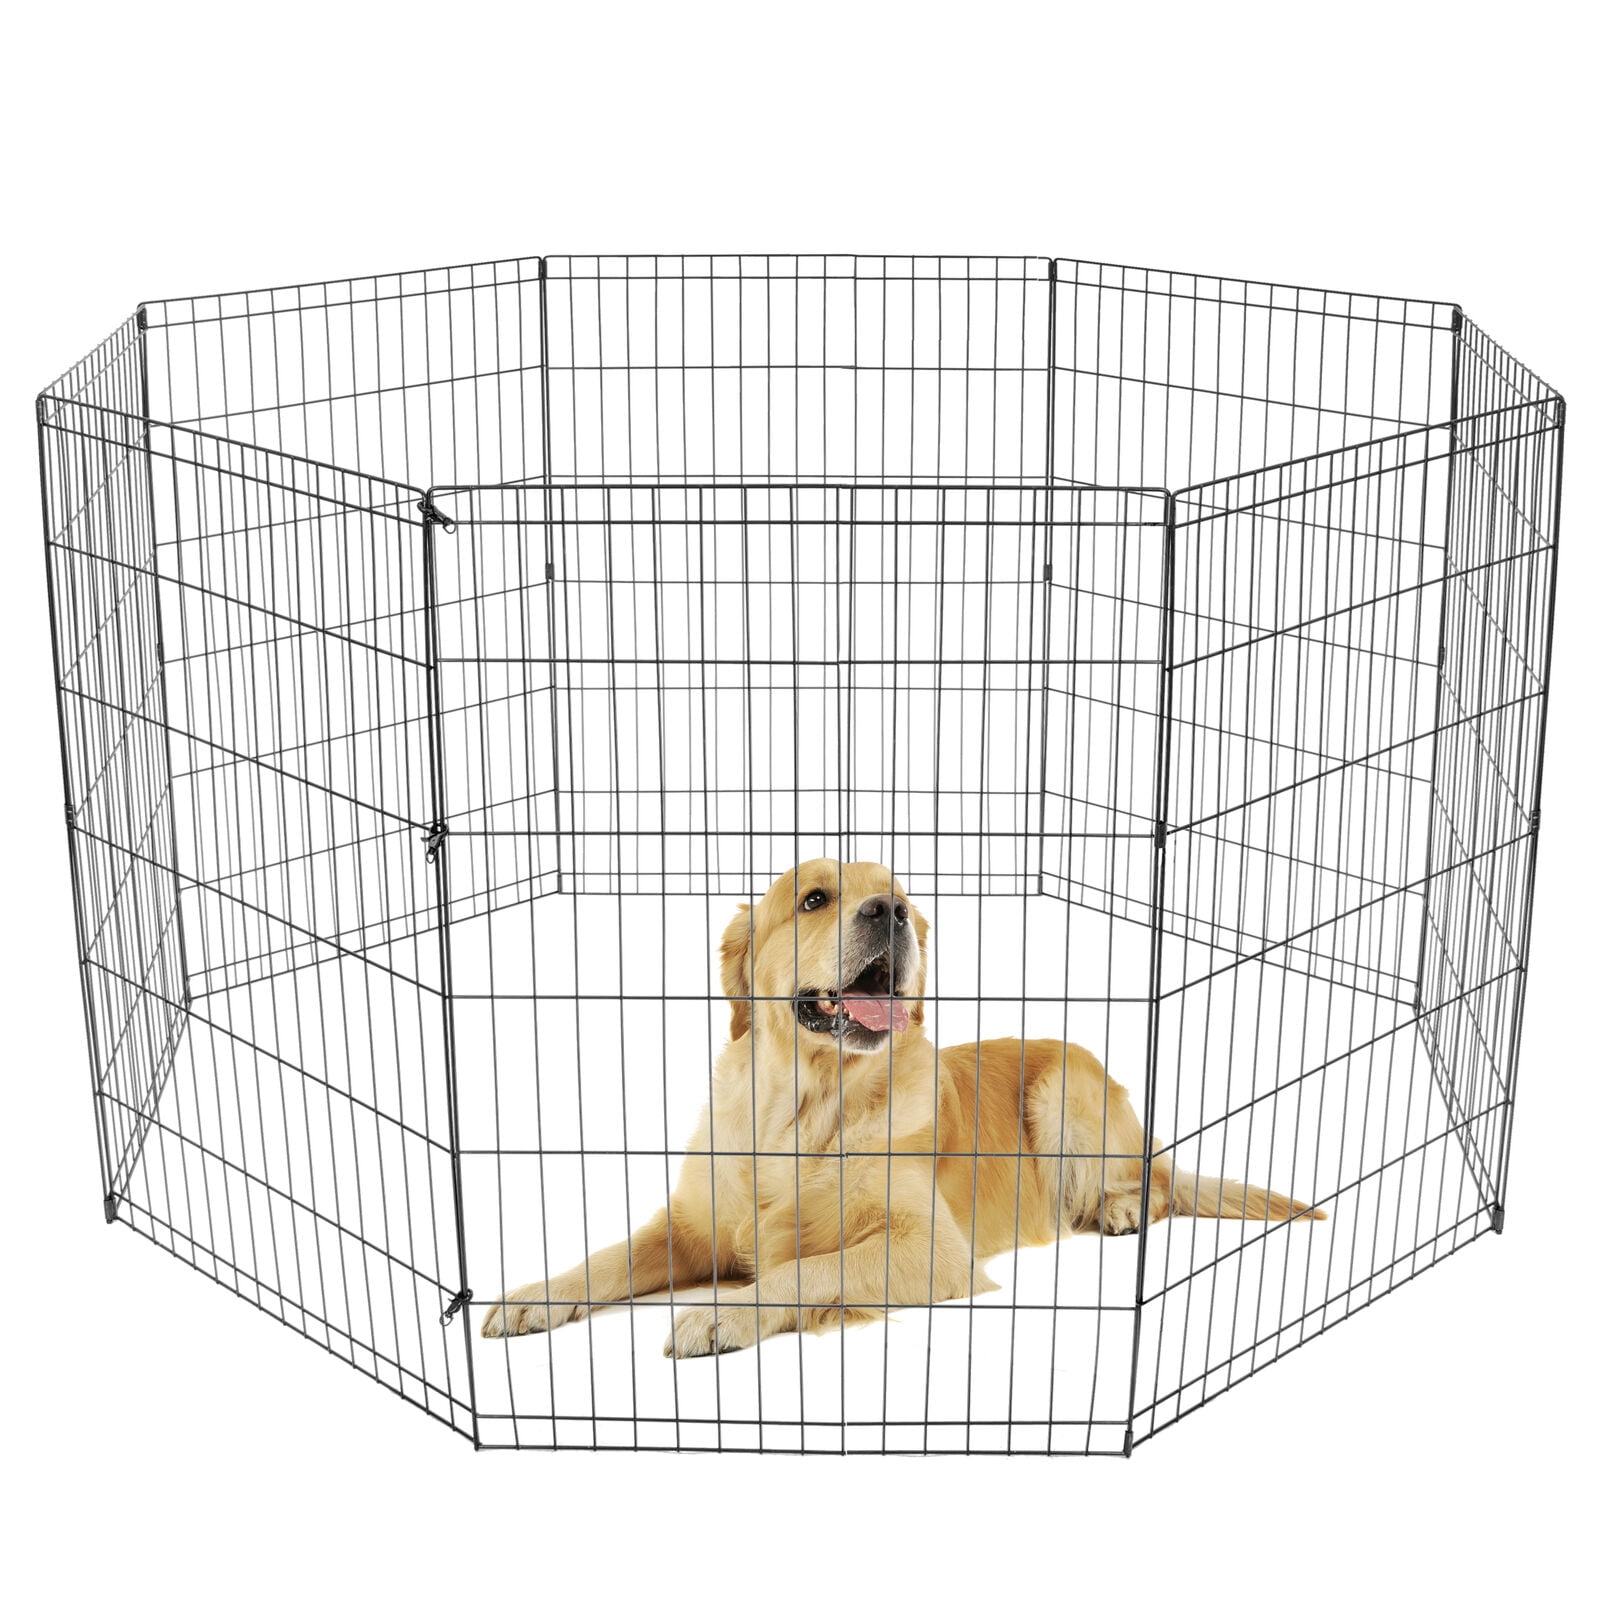 Pet Playpen Puppy Playpen Kennels Dog Fence Exercise Pen Gate Fence Foldable Dog Crate 8 Panels 24 Inch Kennels Pen Playpen Options Ideal for Pet Animals Outdoor Indoor 